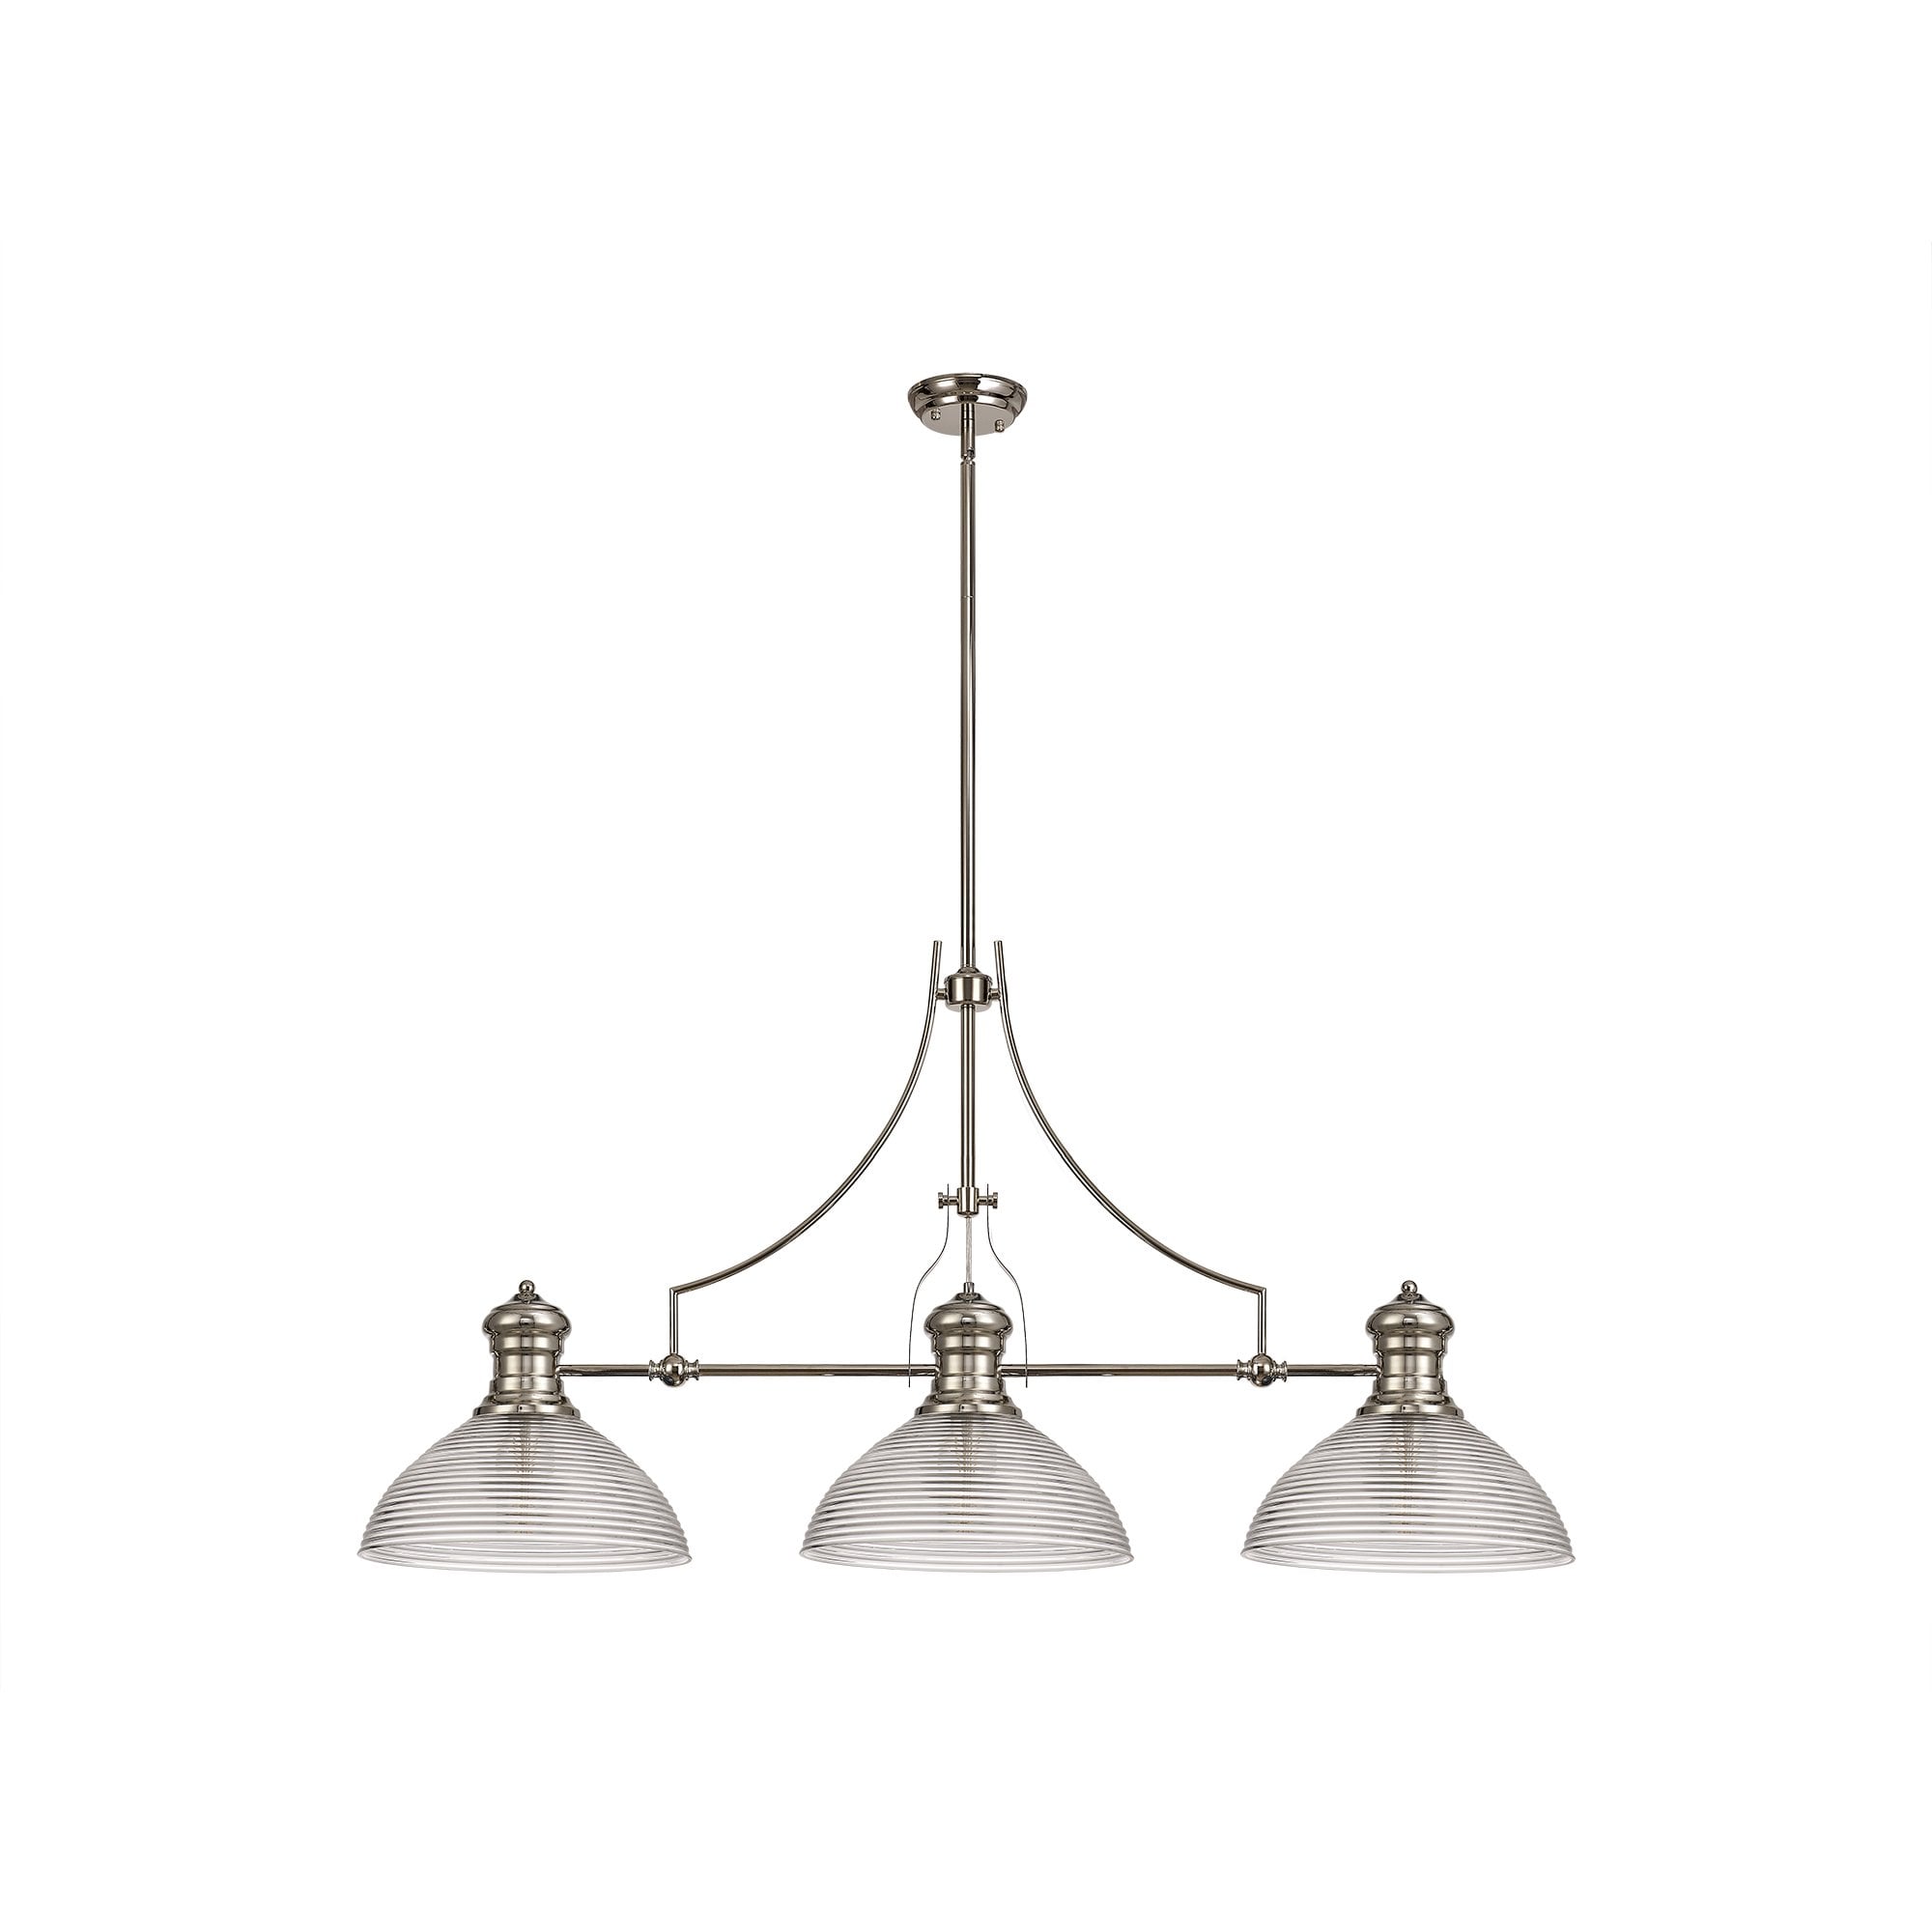 3 Light Telescopic Pendant E27 With 33.5cm Prismatic Glass Shade, Polished Nickel/Clear